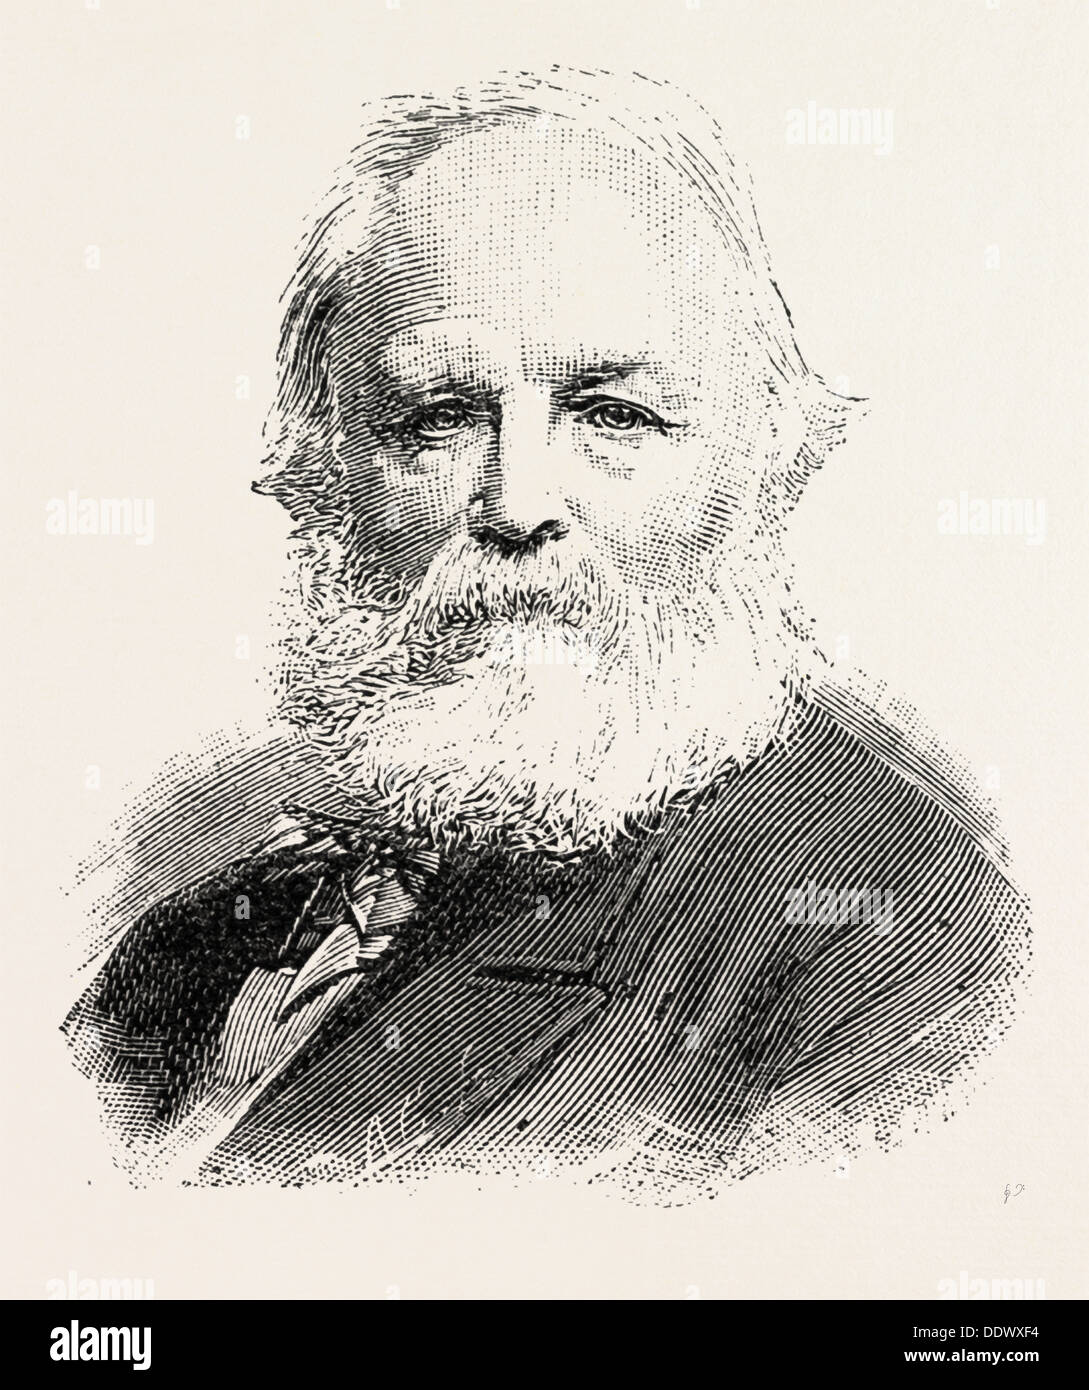 THE LATE MR. LUMB STOCKS, R.A., 1812-1892, BRITISH PAINTER OF THE VICTORIAN ERA, UK, 1892 engraving Stock Photo